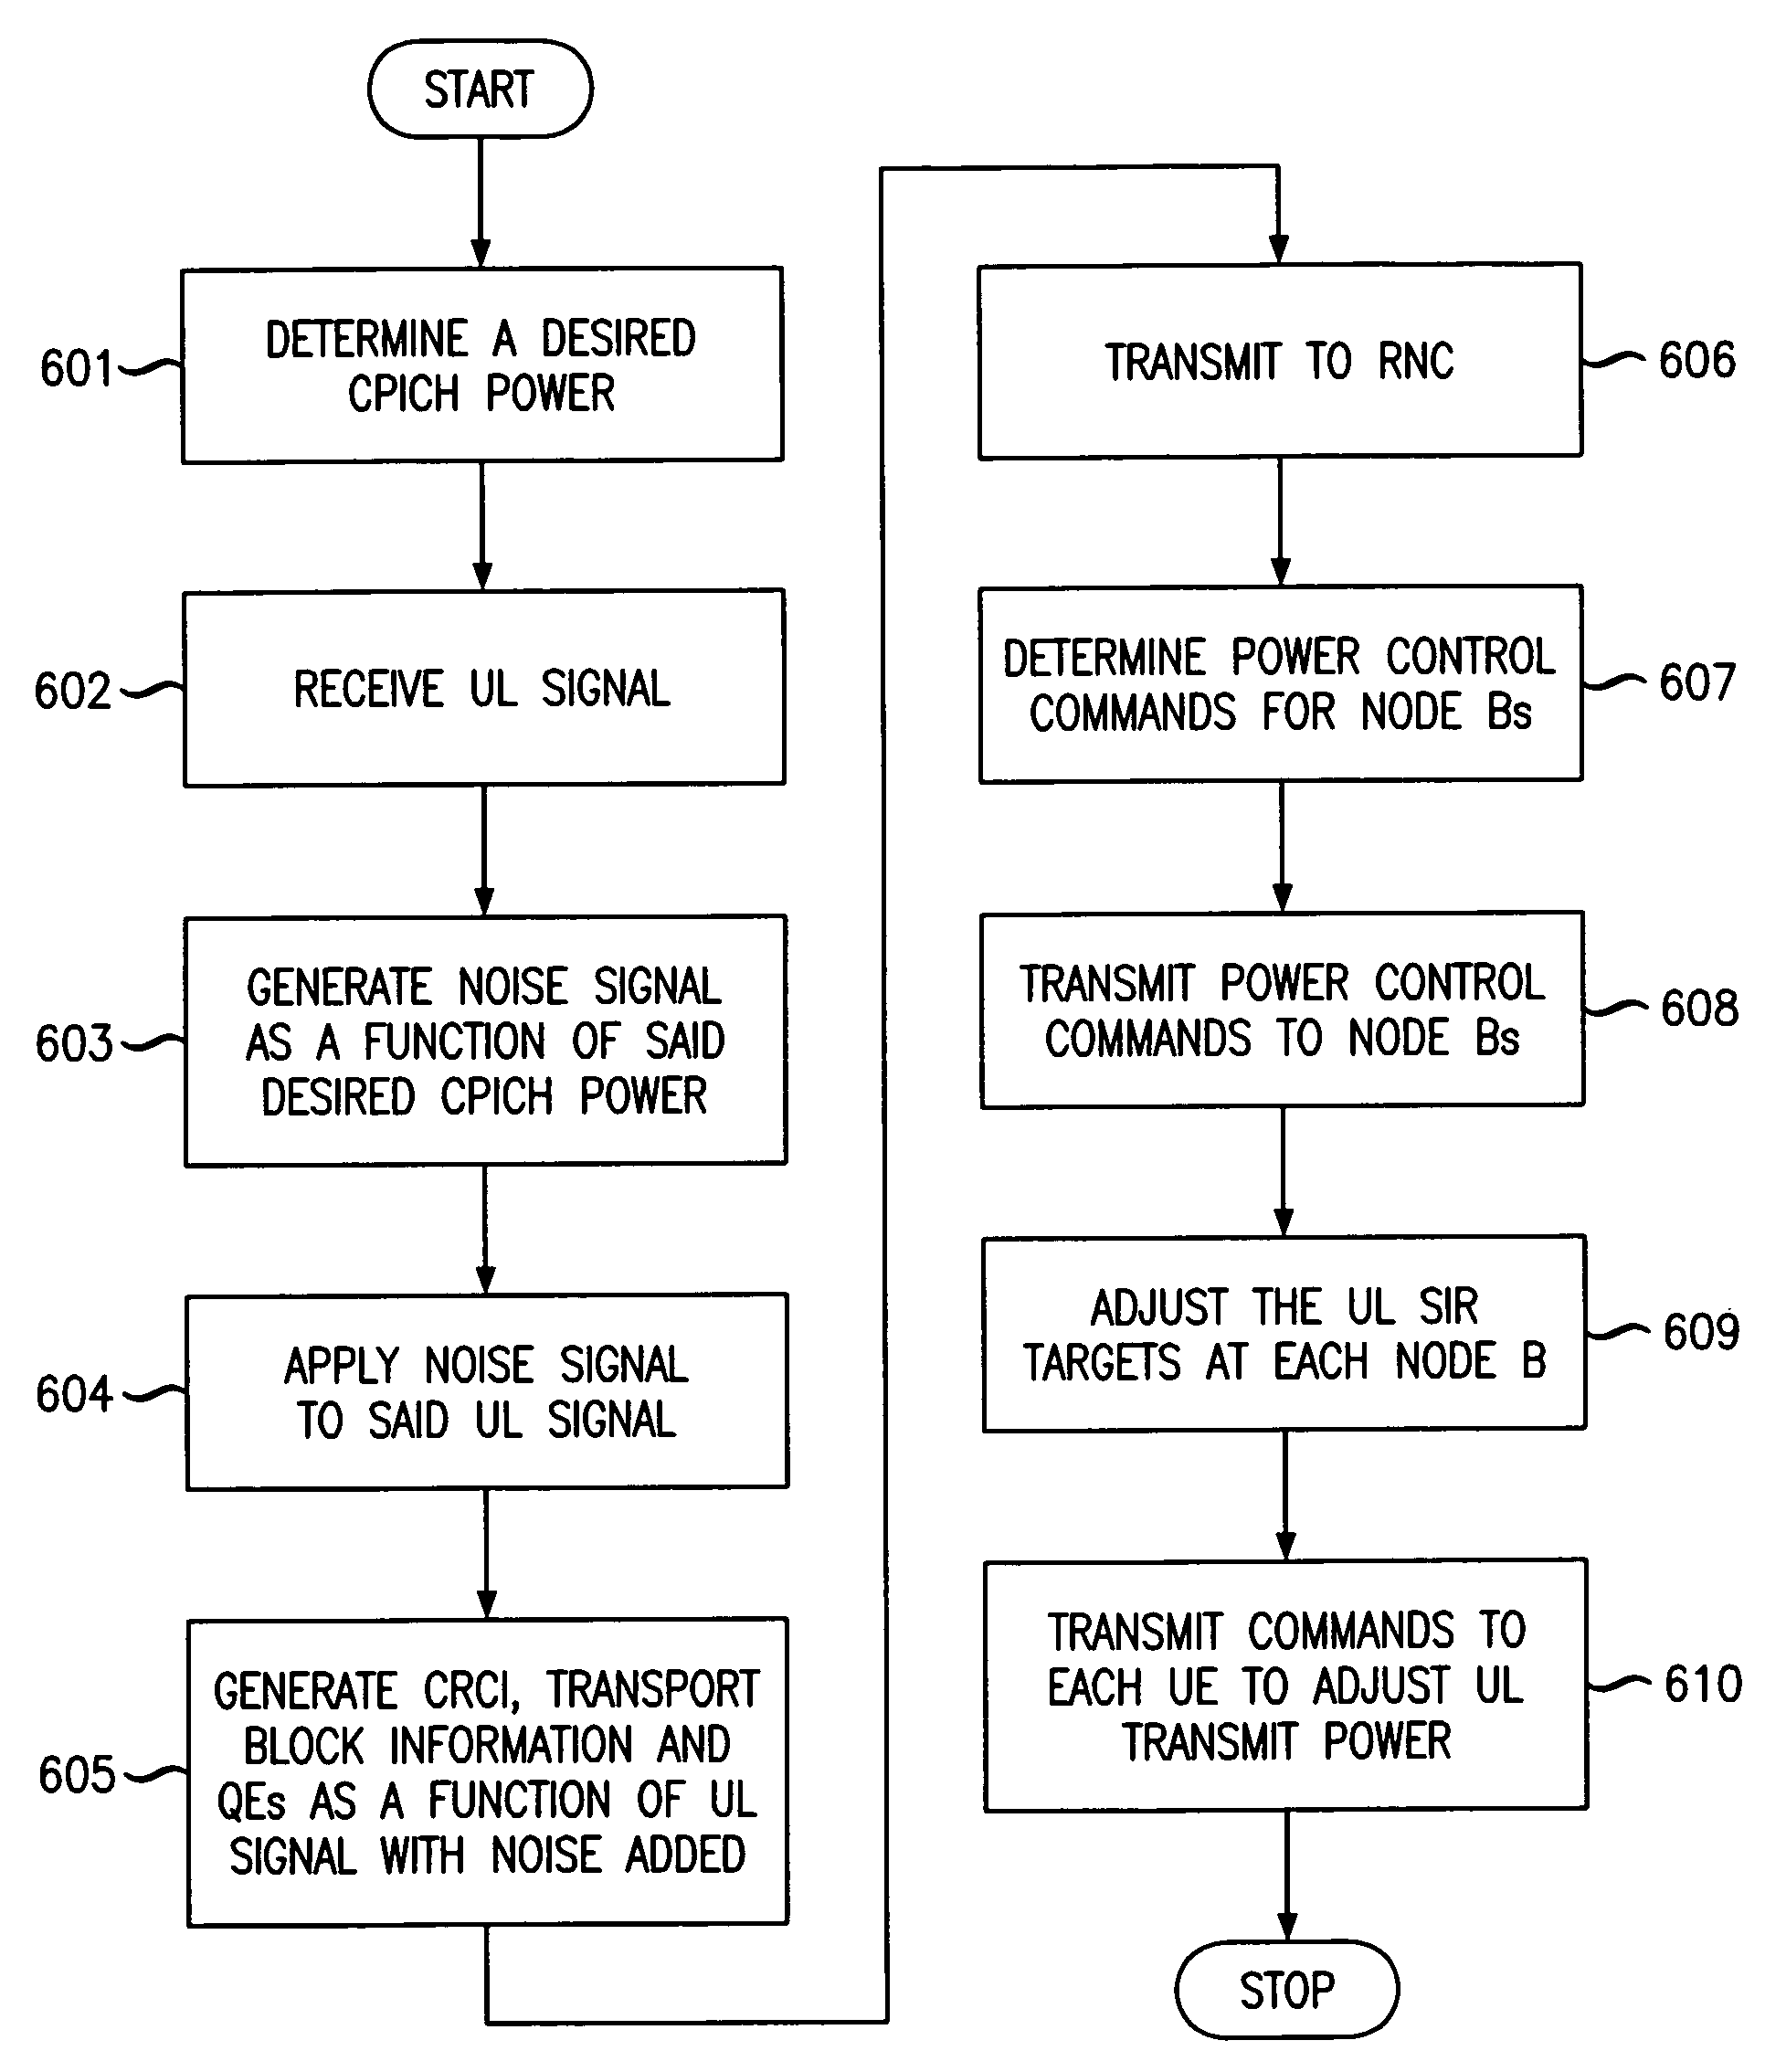 Method and apparatus for path imbalance reduction in networks using high speed data packet access (HSDPA)